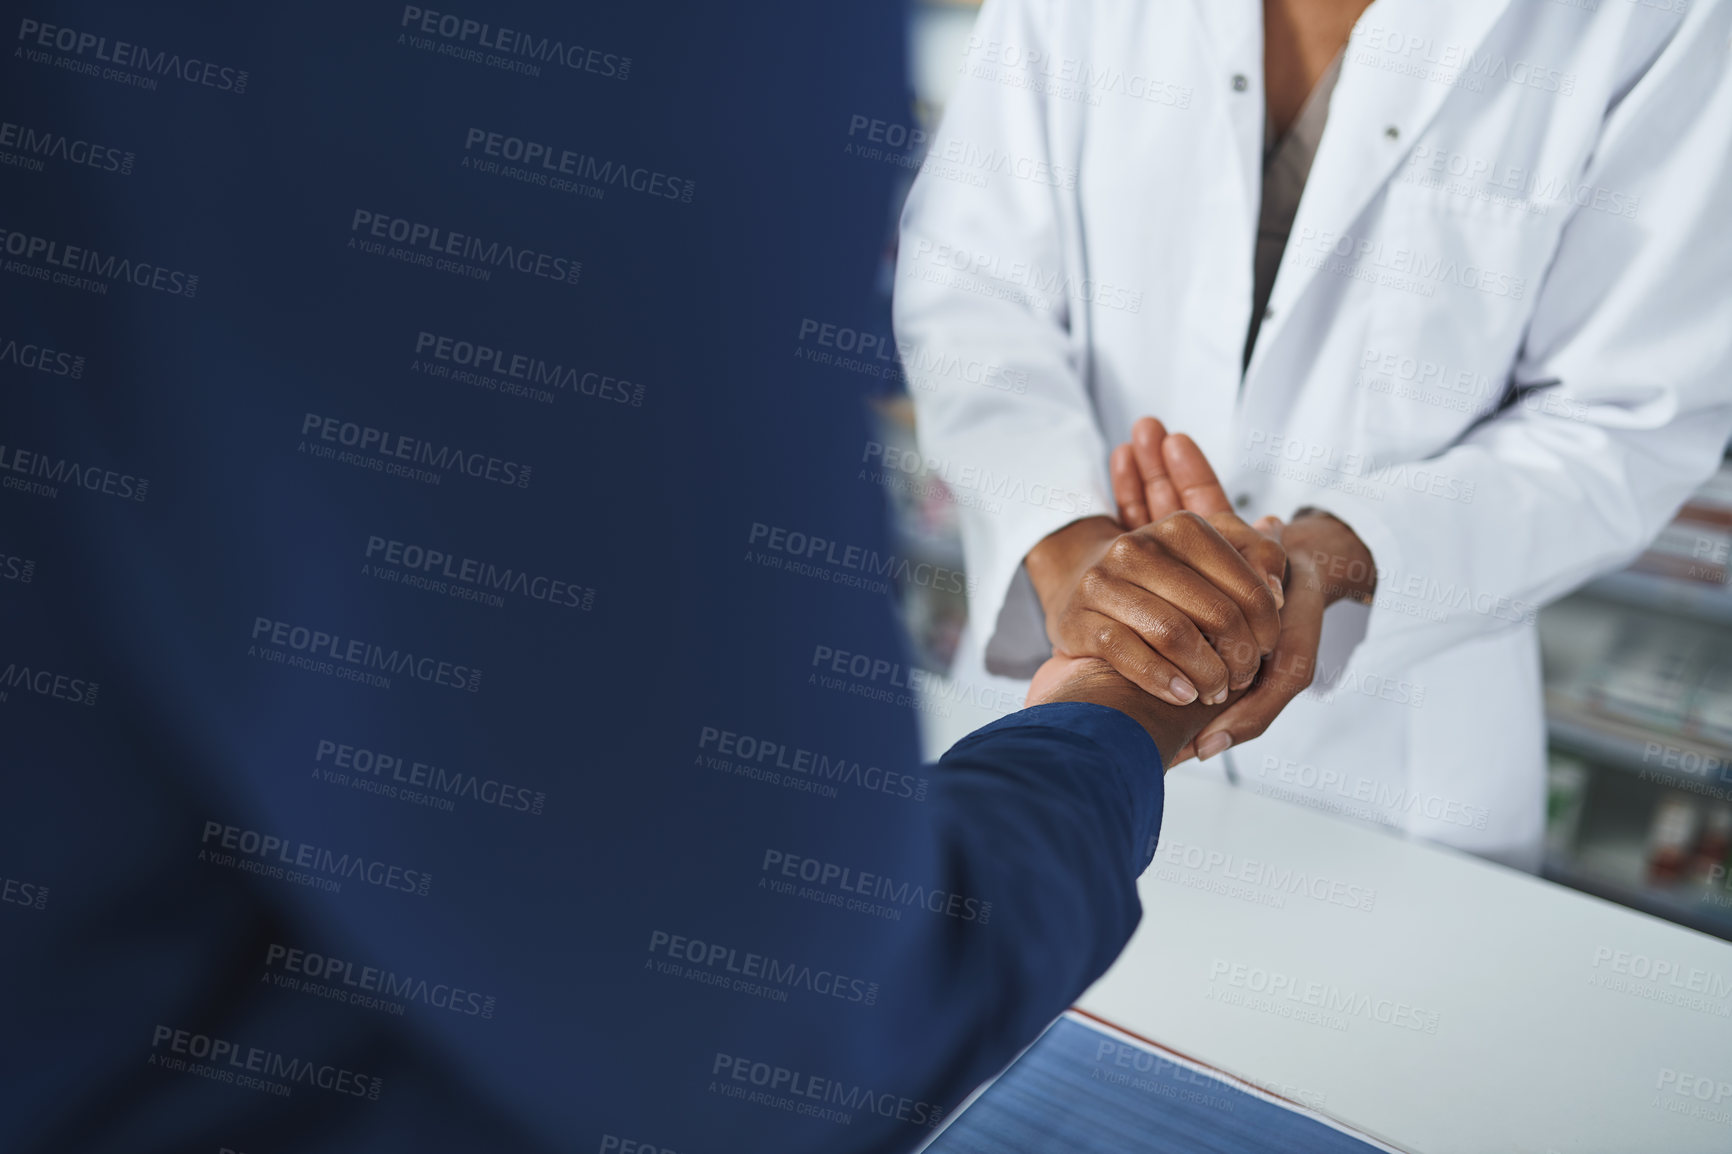 Buy stock photo Cropped shot of a pharmacist compassionately holding a customer’s hand